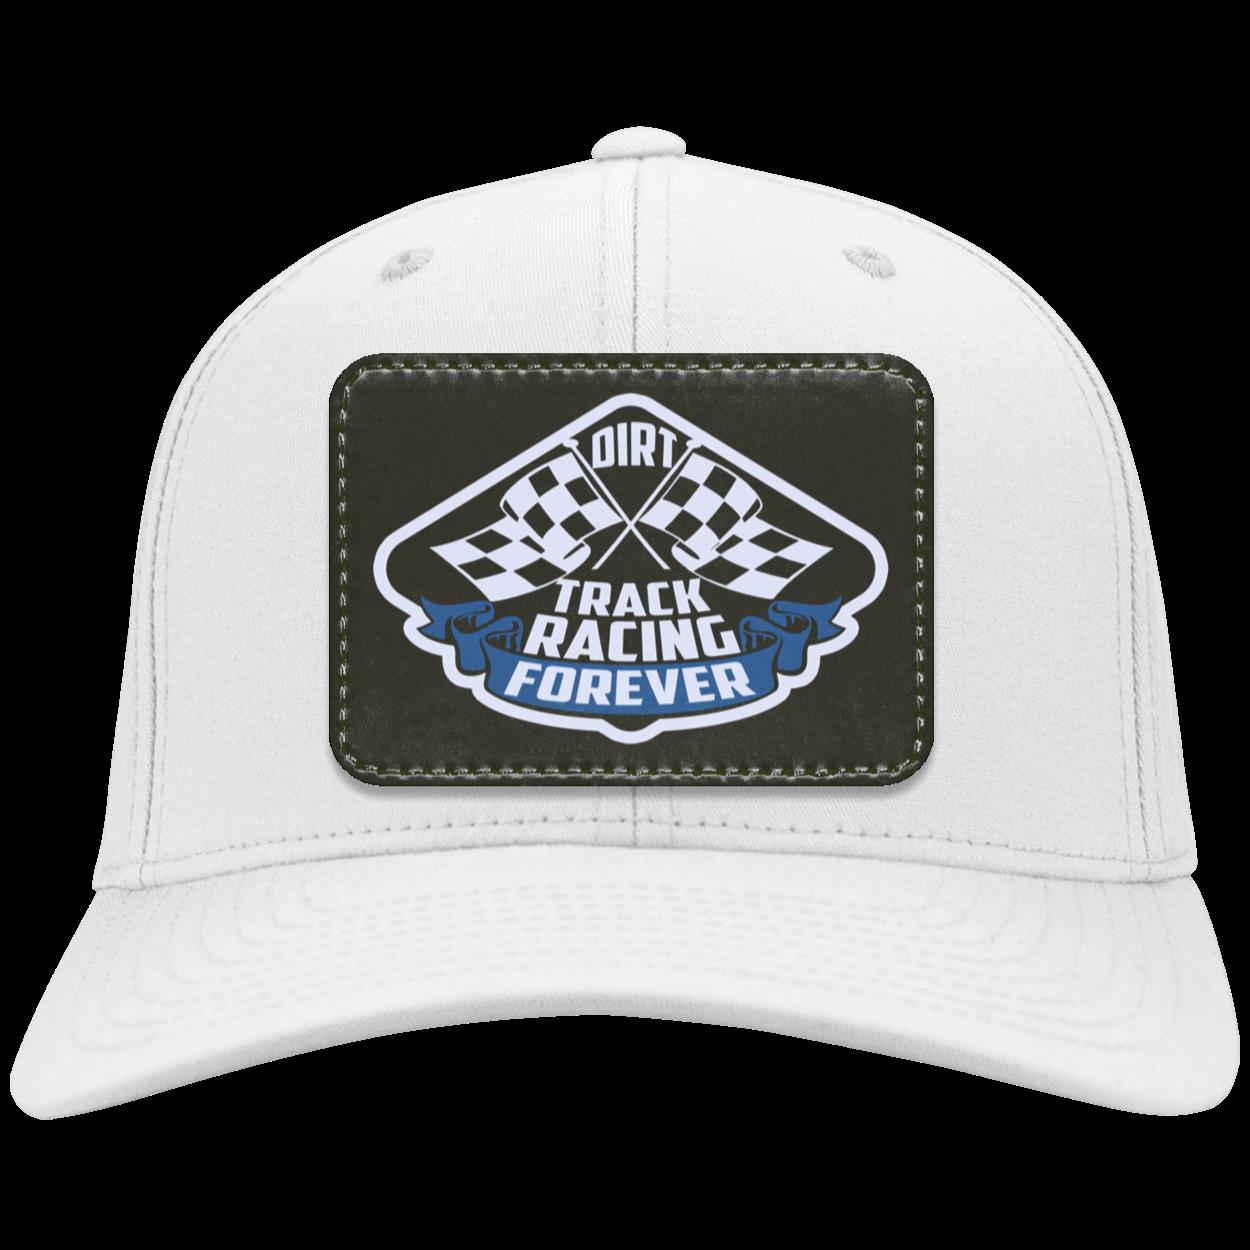 Dirt Track Racing Forever Patched Twill Cap V4